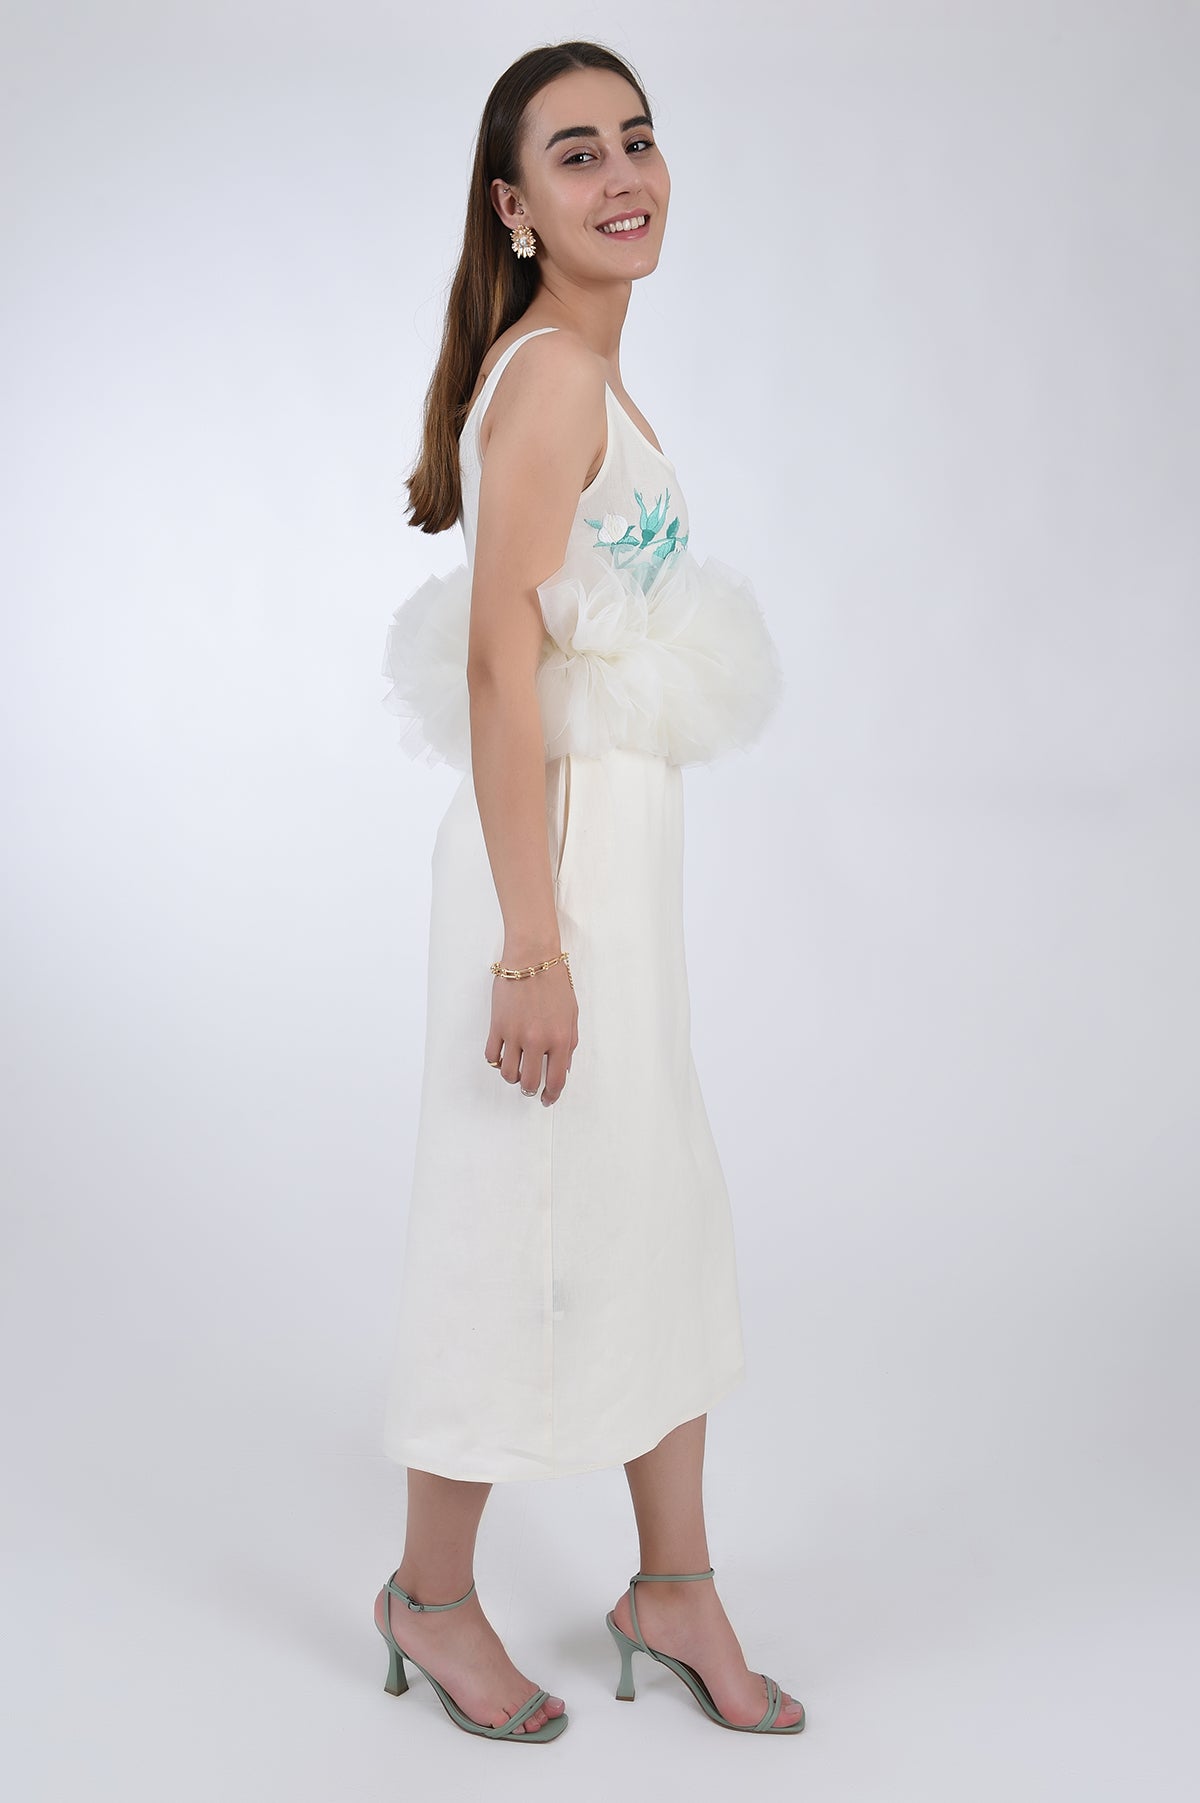 Fanm Mon Citra Linen &amp; Tulle Midi Dress, side view. Featuring embroidery detail at the chest, and tulling at the waist.  